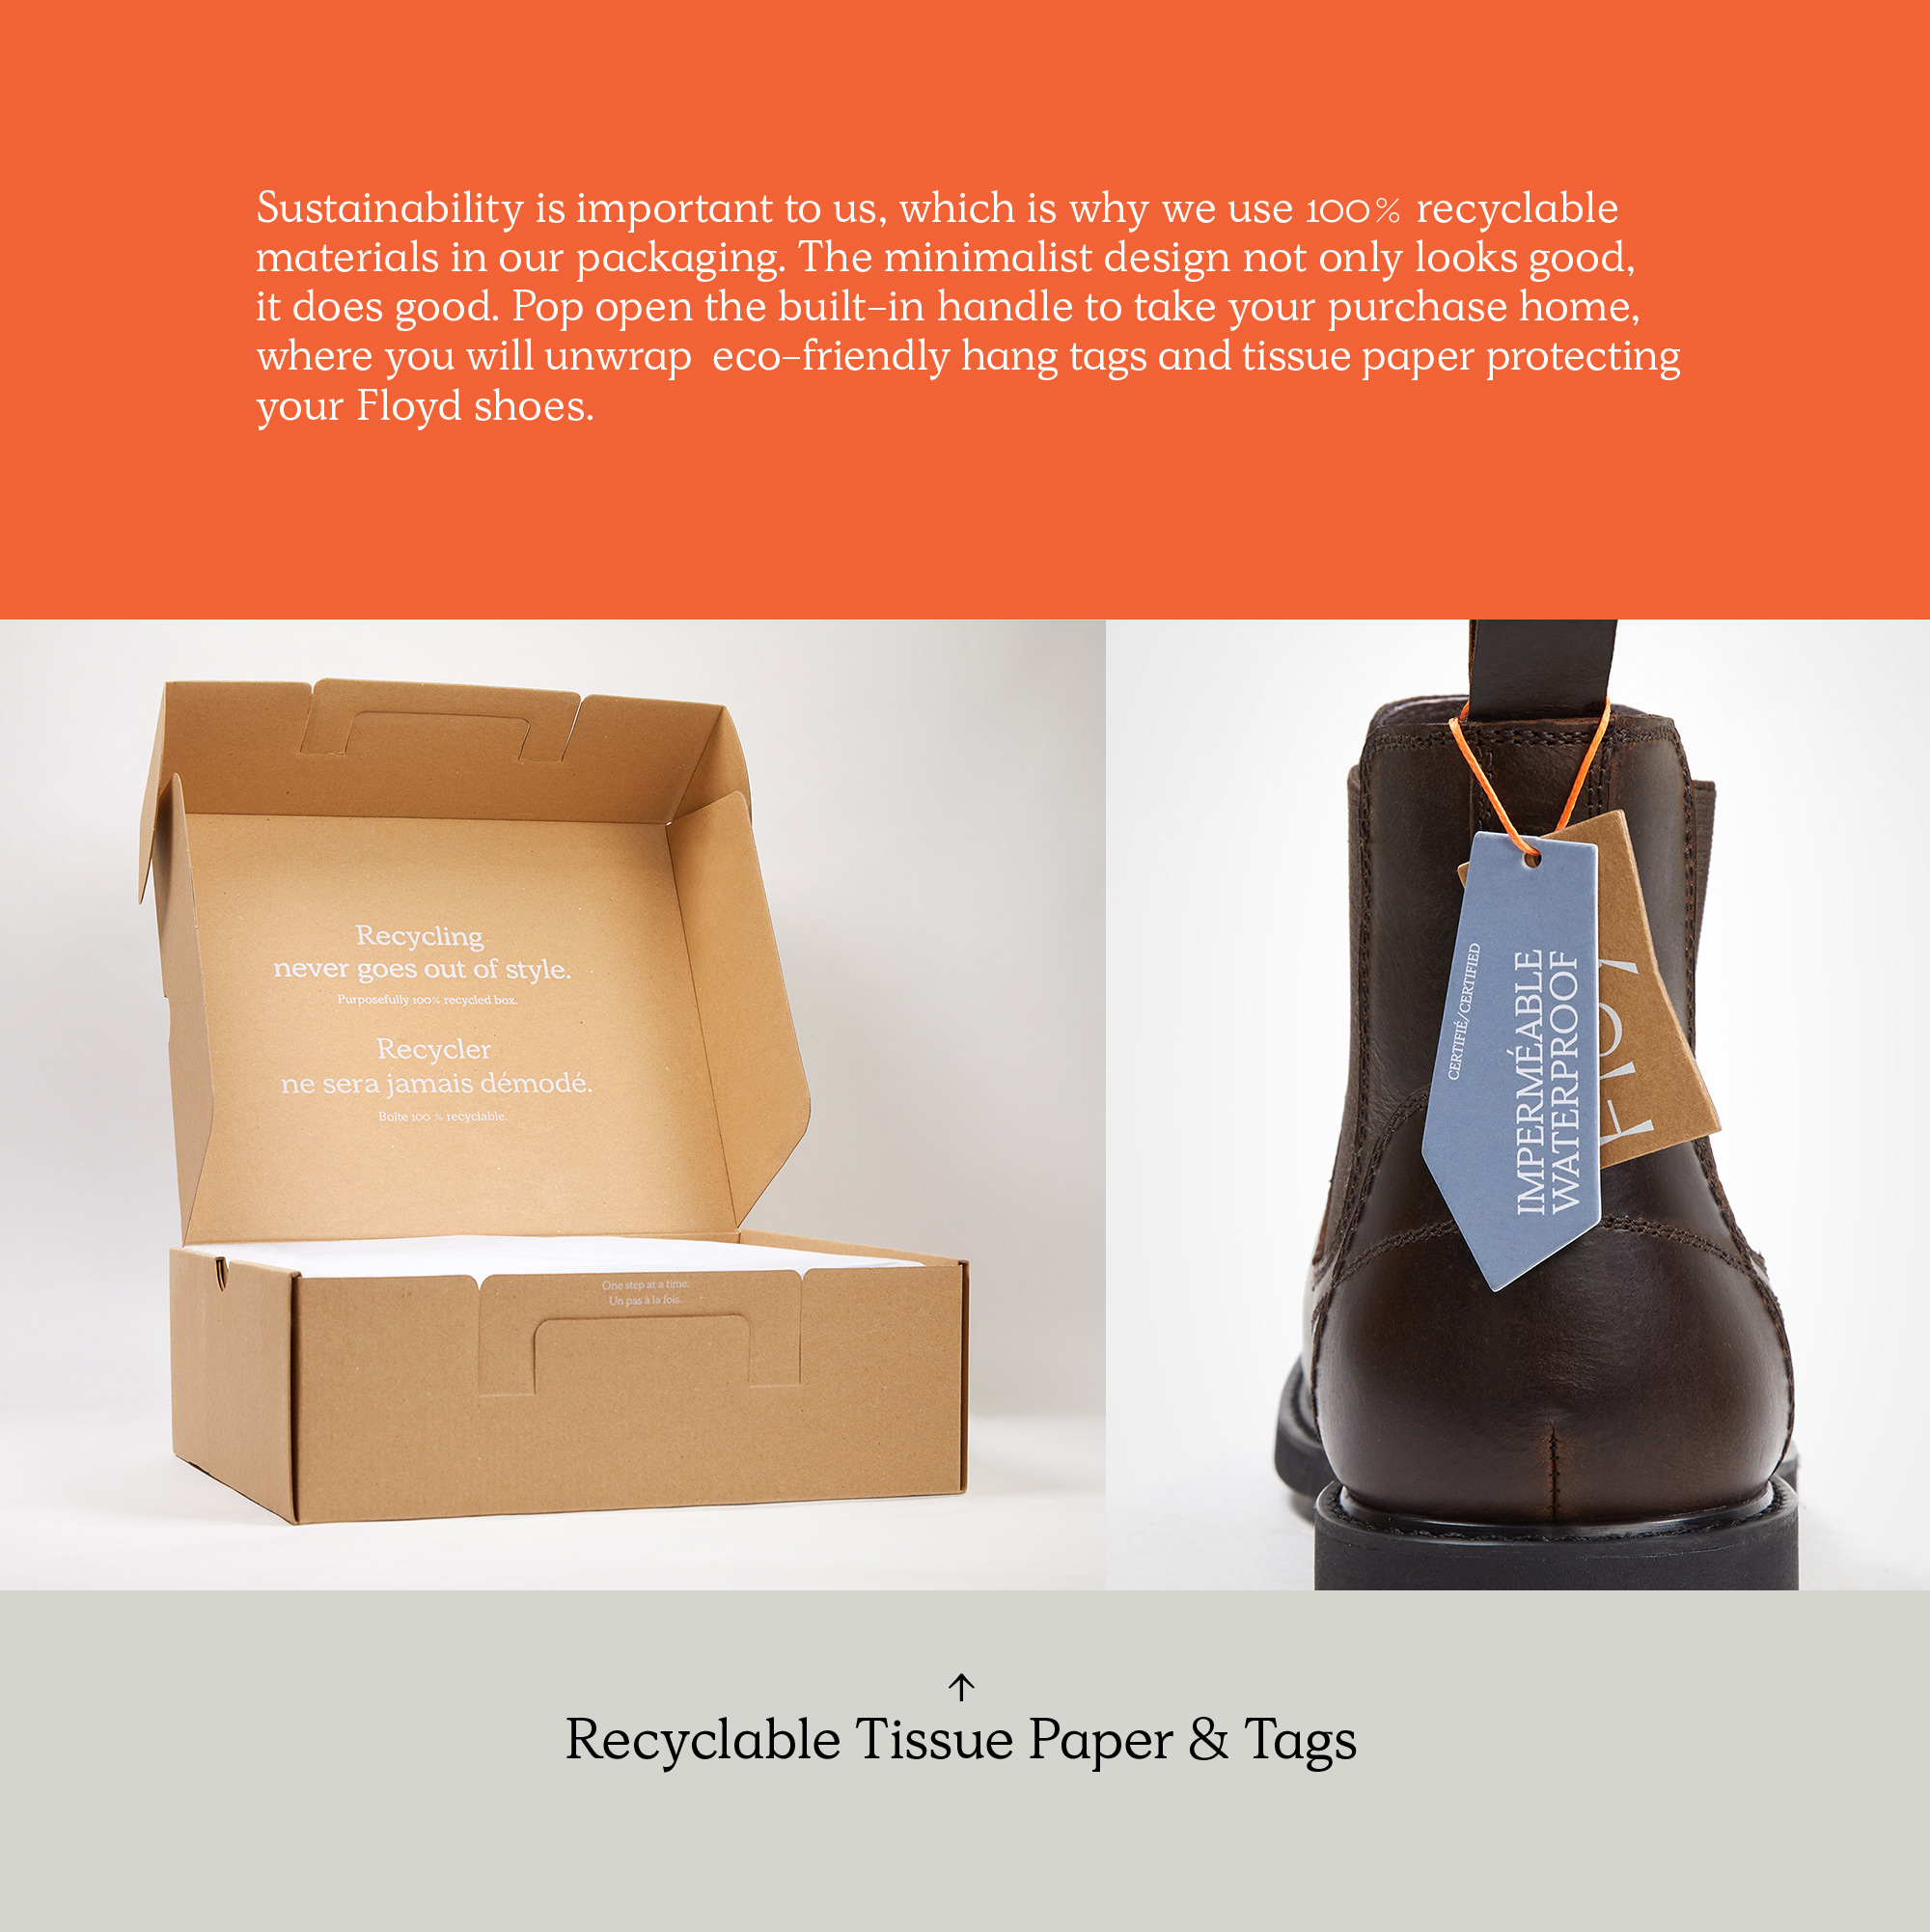 BOXES AND TAGS MADE FROM SUSTAINABLE MATERIALS